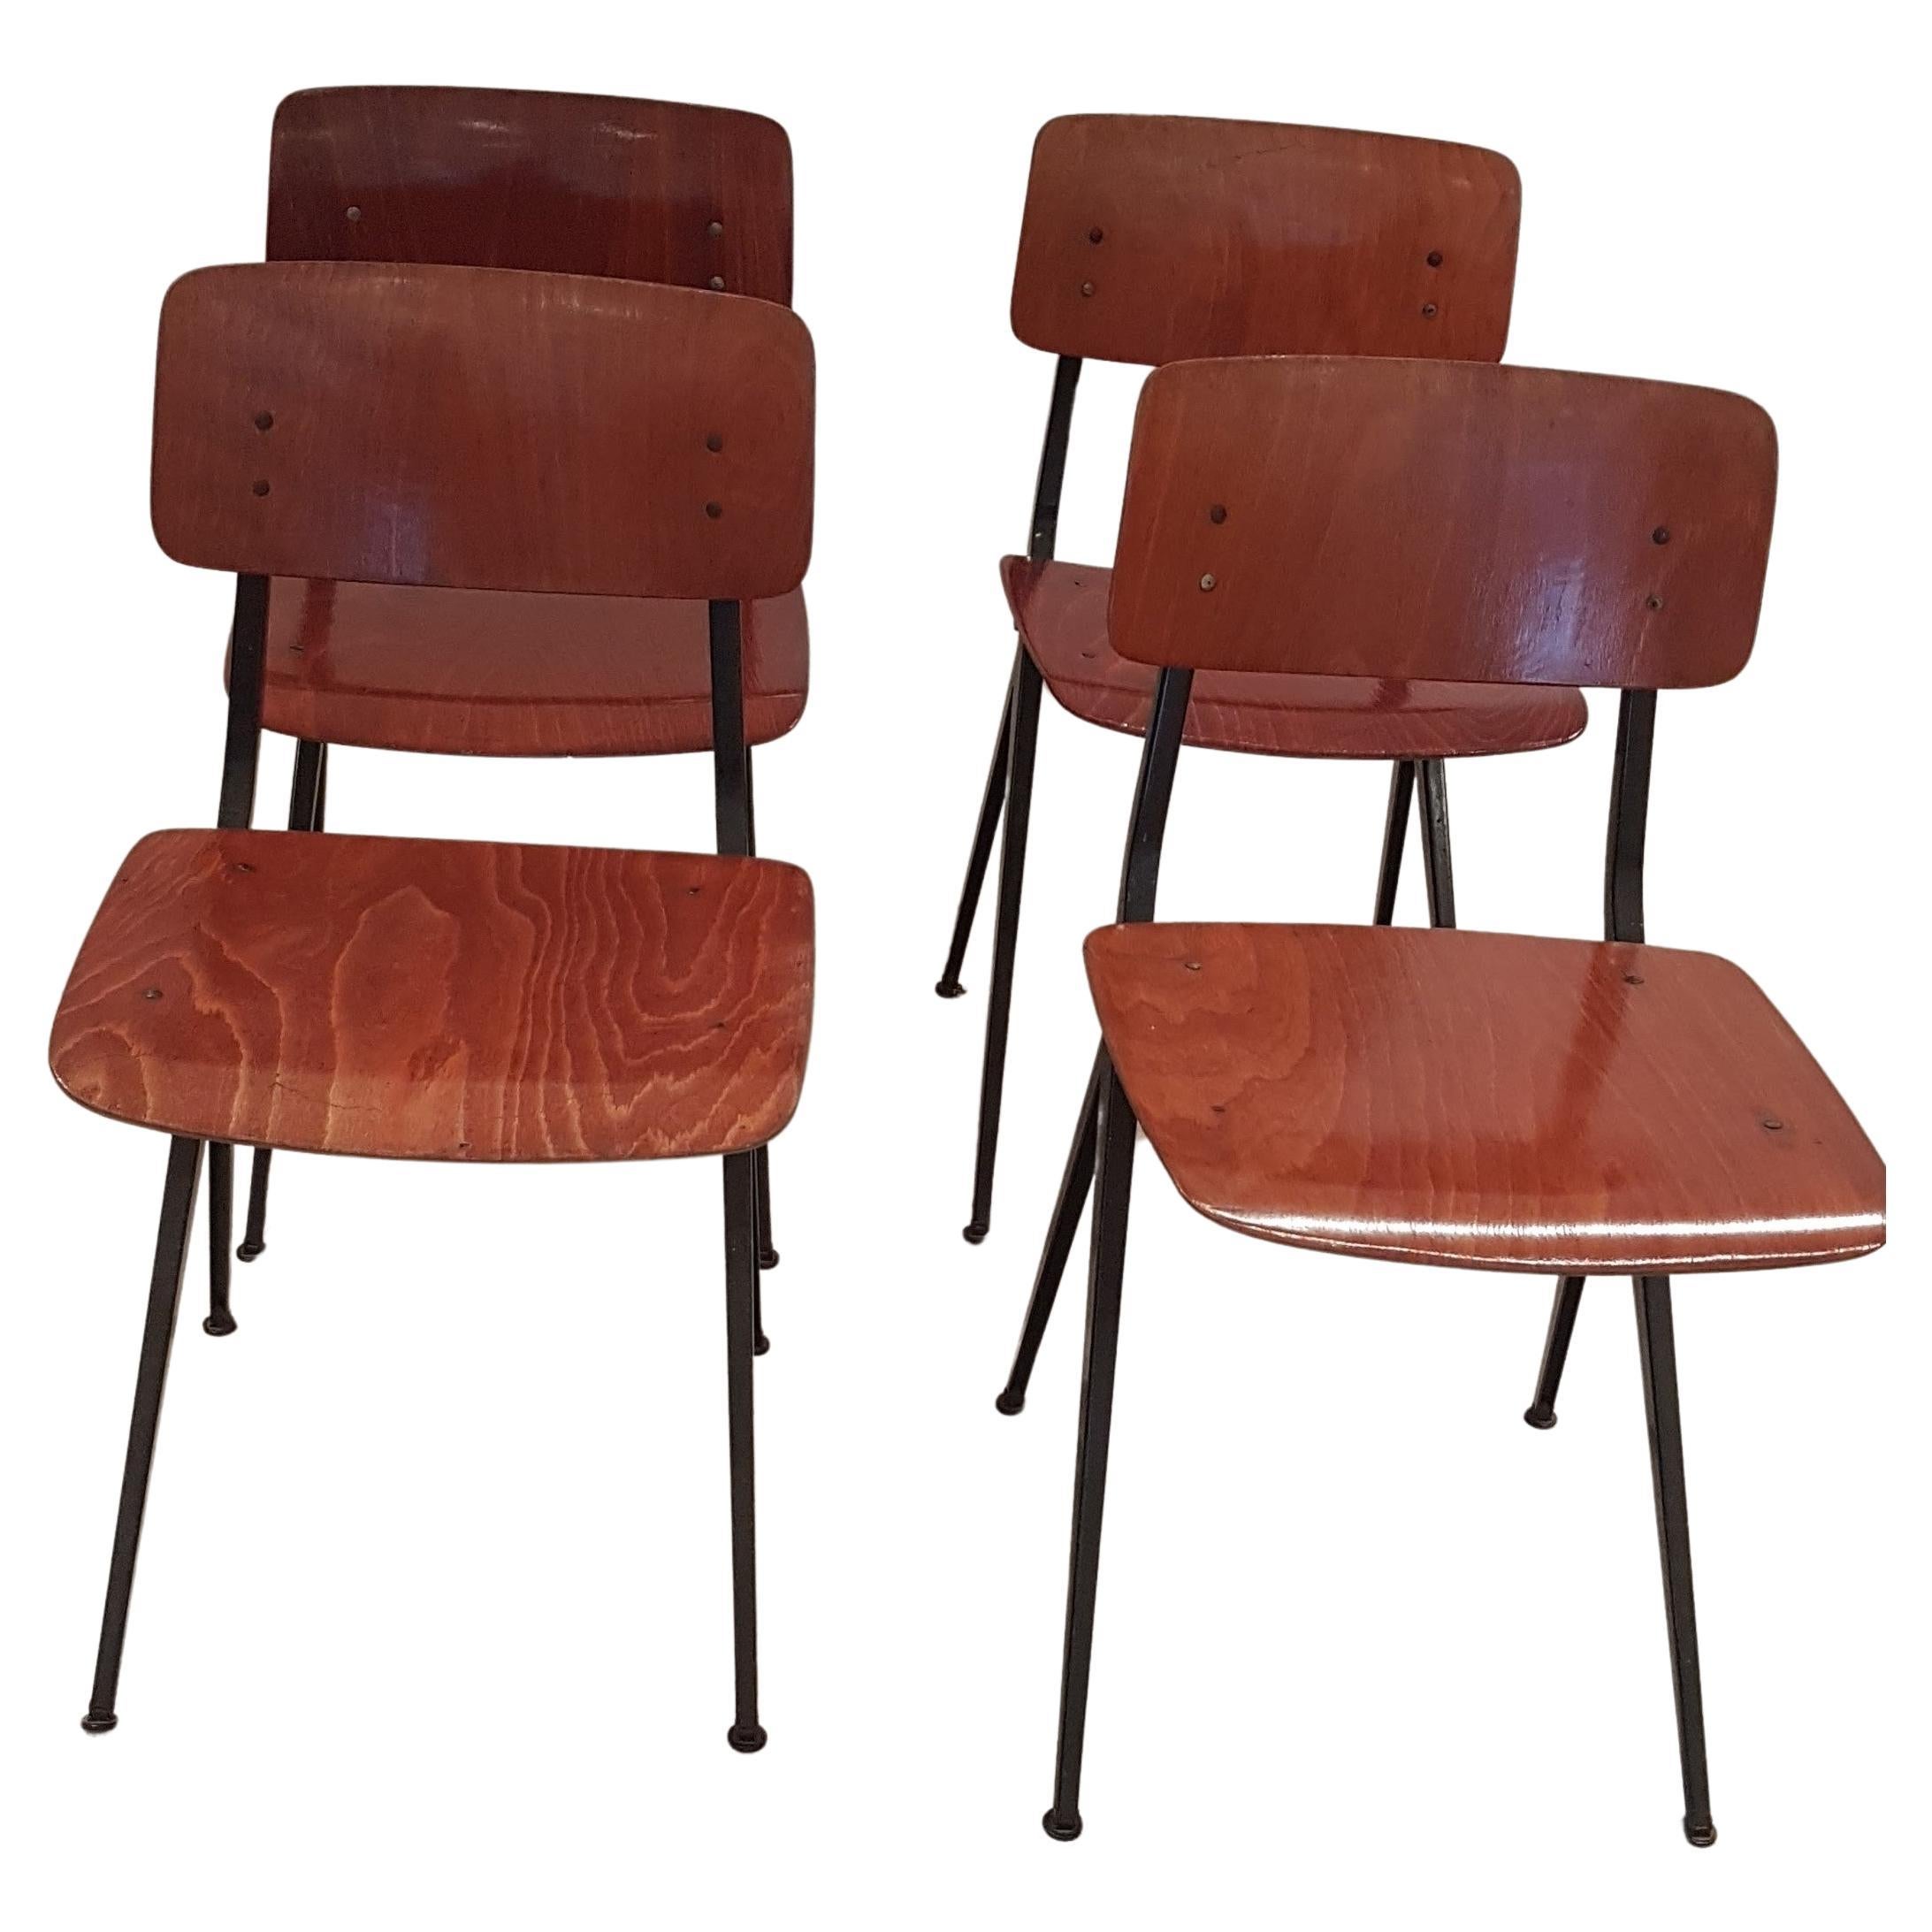 Set of four industrial style chairs by Marko Holland. This comfortable utilitarian chairs have beautiful aged teak seats and backs and black lacquered metal minimalist frames. Their simplicity mean they would fit into any decorative scheme and their